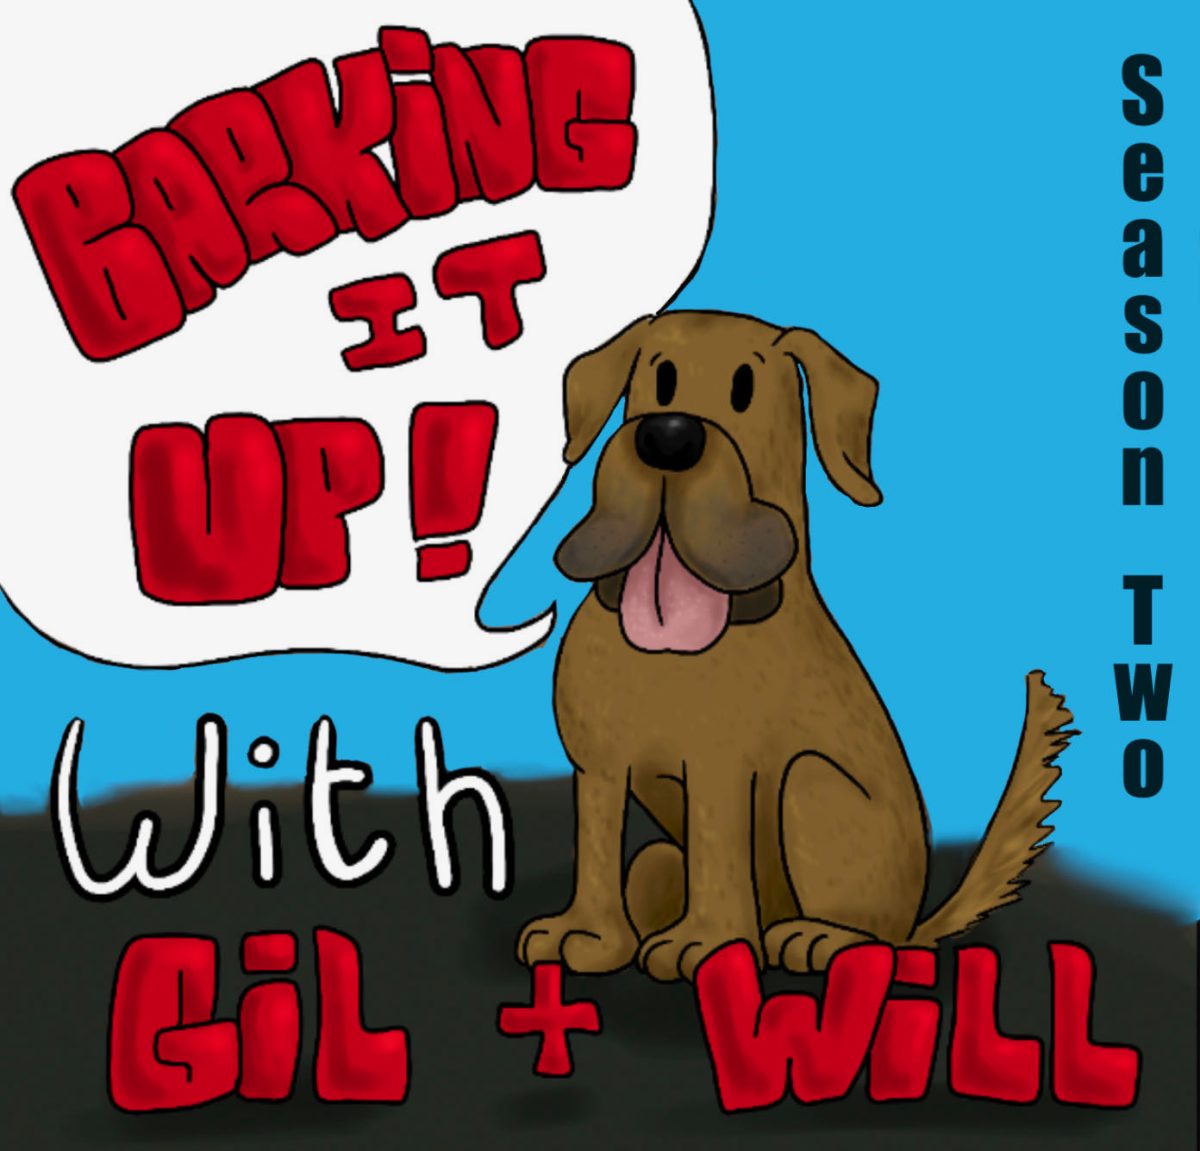 SZN 2 EP 3: Barking It Up With Gil & Will ft. BJ Fisher